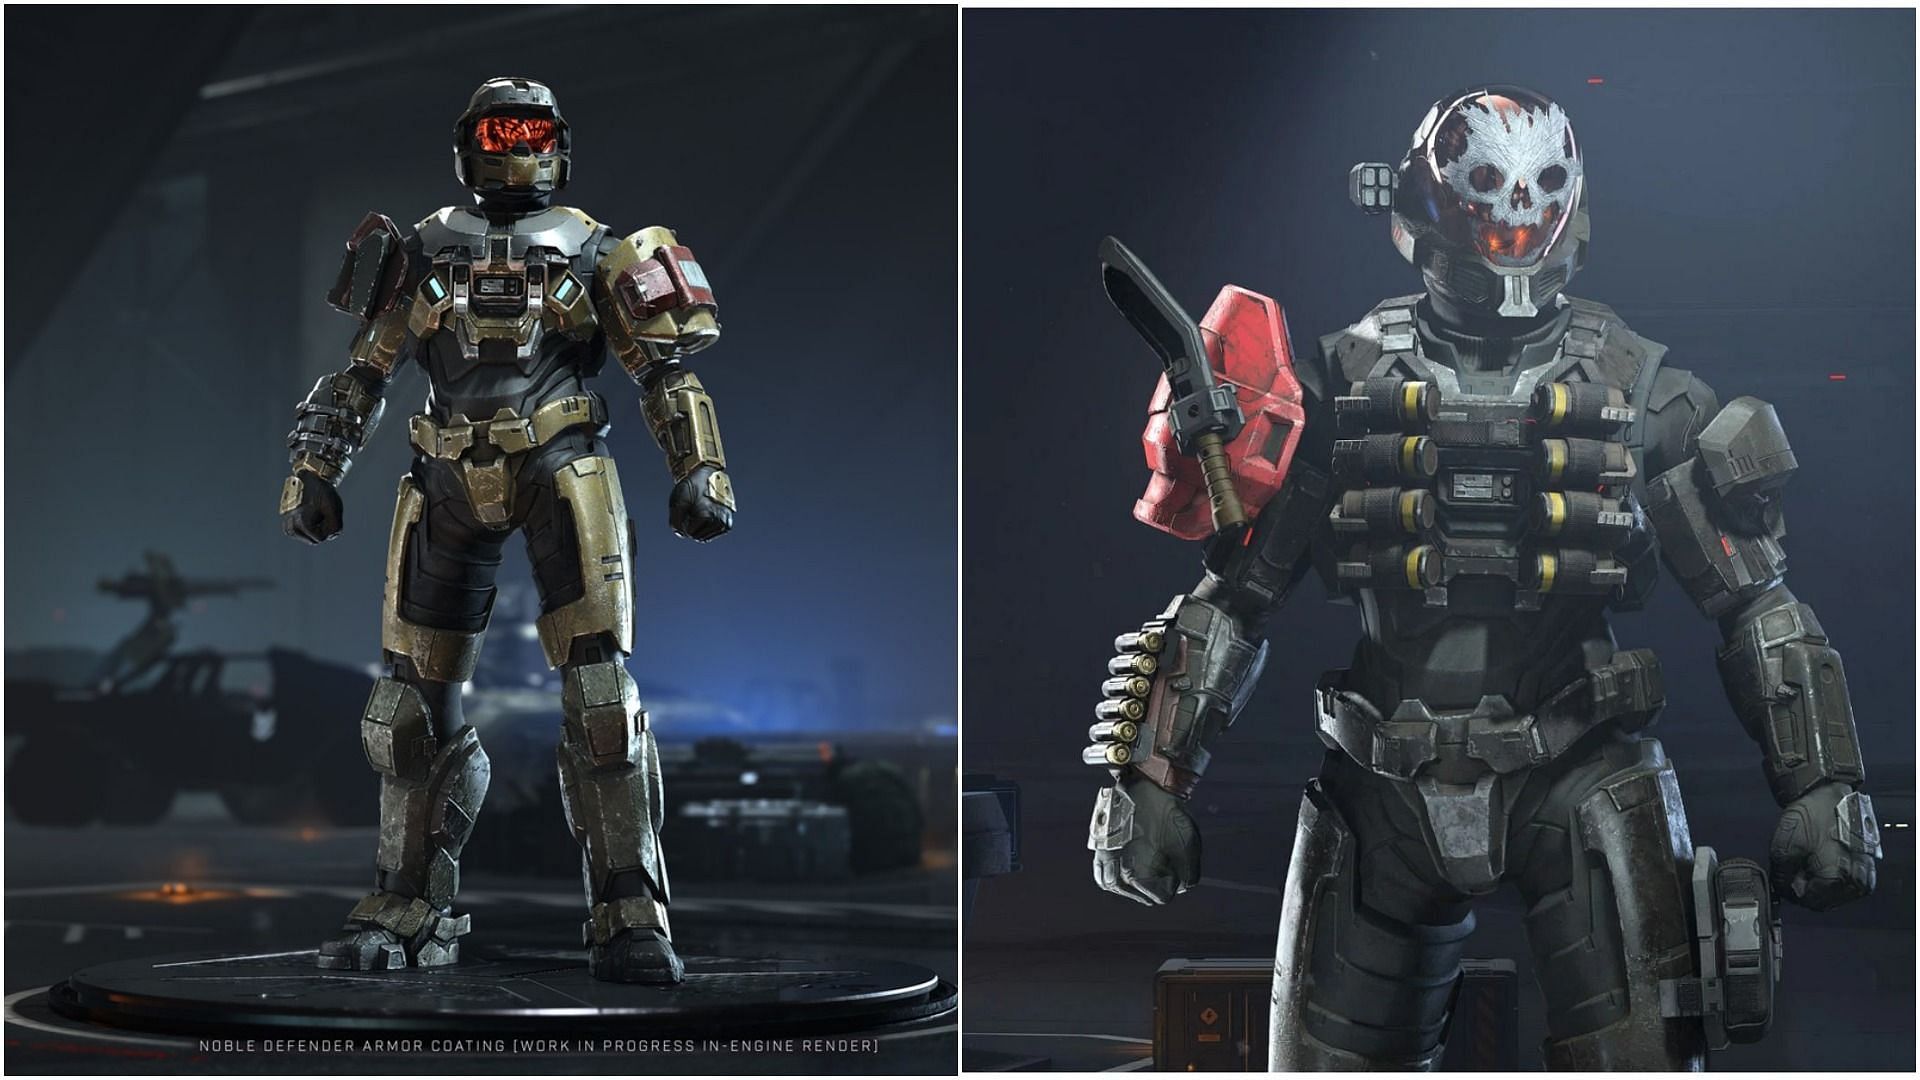 Halo Infinite players will get more armor customization options in the future (Images via 343 Industries)